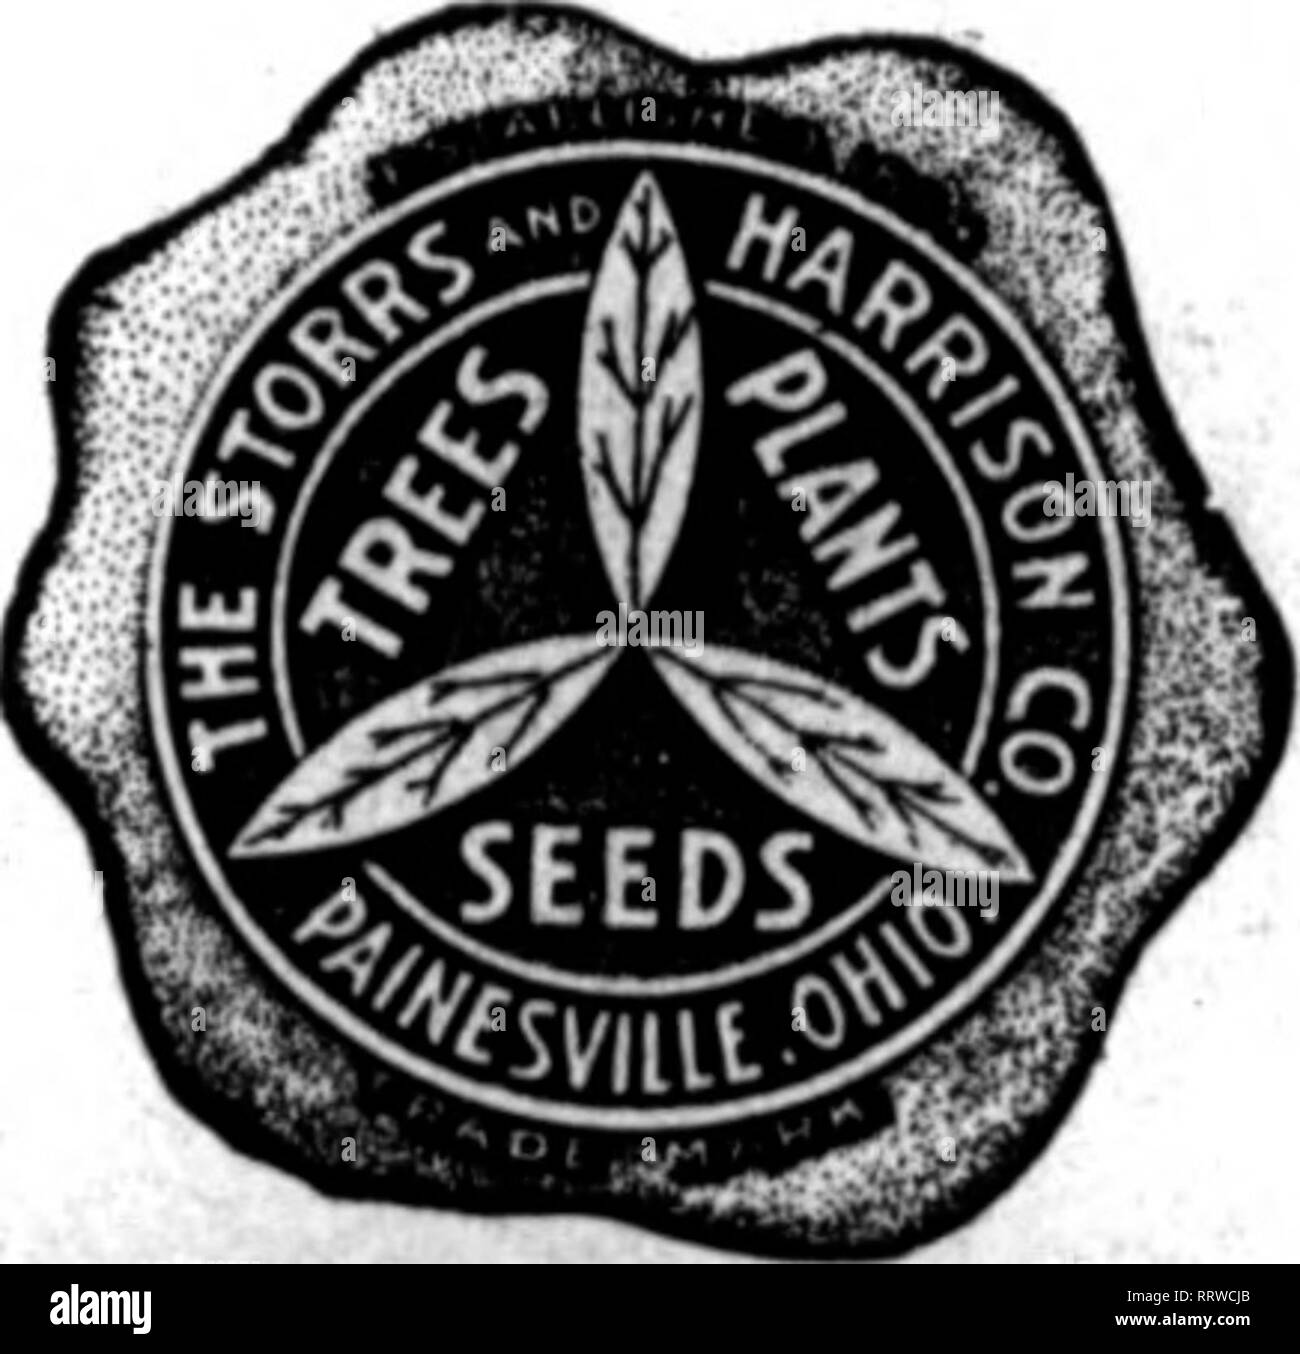 . Florists' review [microform]. Floriculture. &quot;Superb Quality&quot; SEEDS FOR FLORISTS THE STORRS &amp; HARRISON CO/S SUPERB MIXTURE OF GIANT PANSY SEED Contaias the Ultimate In Olant Pansies. You cannot buy a better mixture of Pansy Seed at any price. Trade Packet. 50c; ^ oz., $1.25; oz., |4.00. We carry in stock all named and separate colors of Olant Pansies, also the best strains of Odier, Gassier, BuKuot, Trimardeau, etc. (See our trade list for prices.) Cineraria Grandiflora :J;:ro'):tlrdV;a&quot;kItf^^^^^^^ Bellis Perennis (English Daisy) Longfellow (red), Snowball (white), Tr. Pkt. Stock Photo